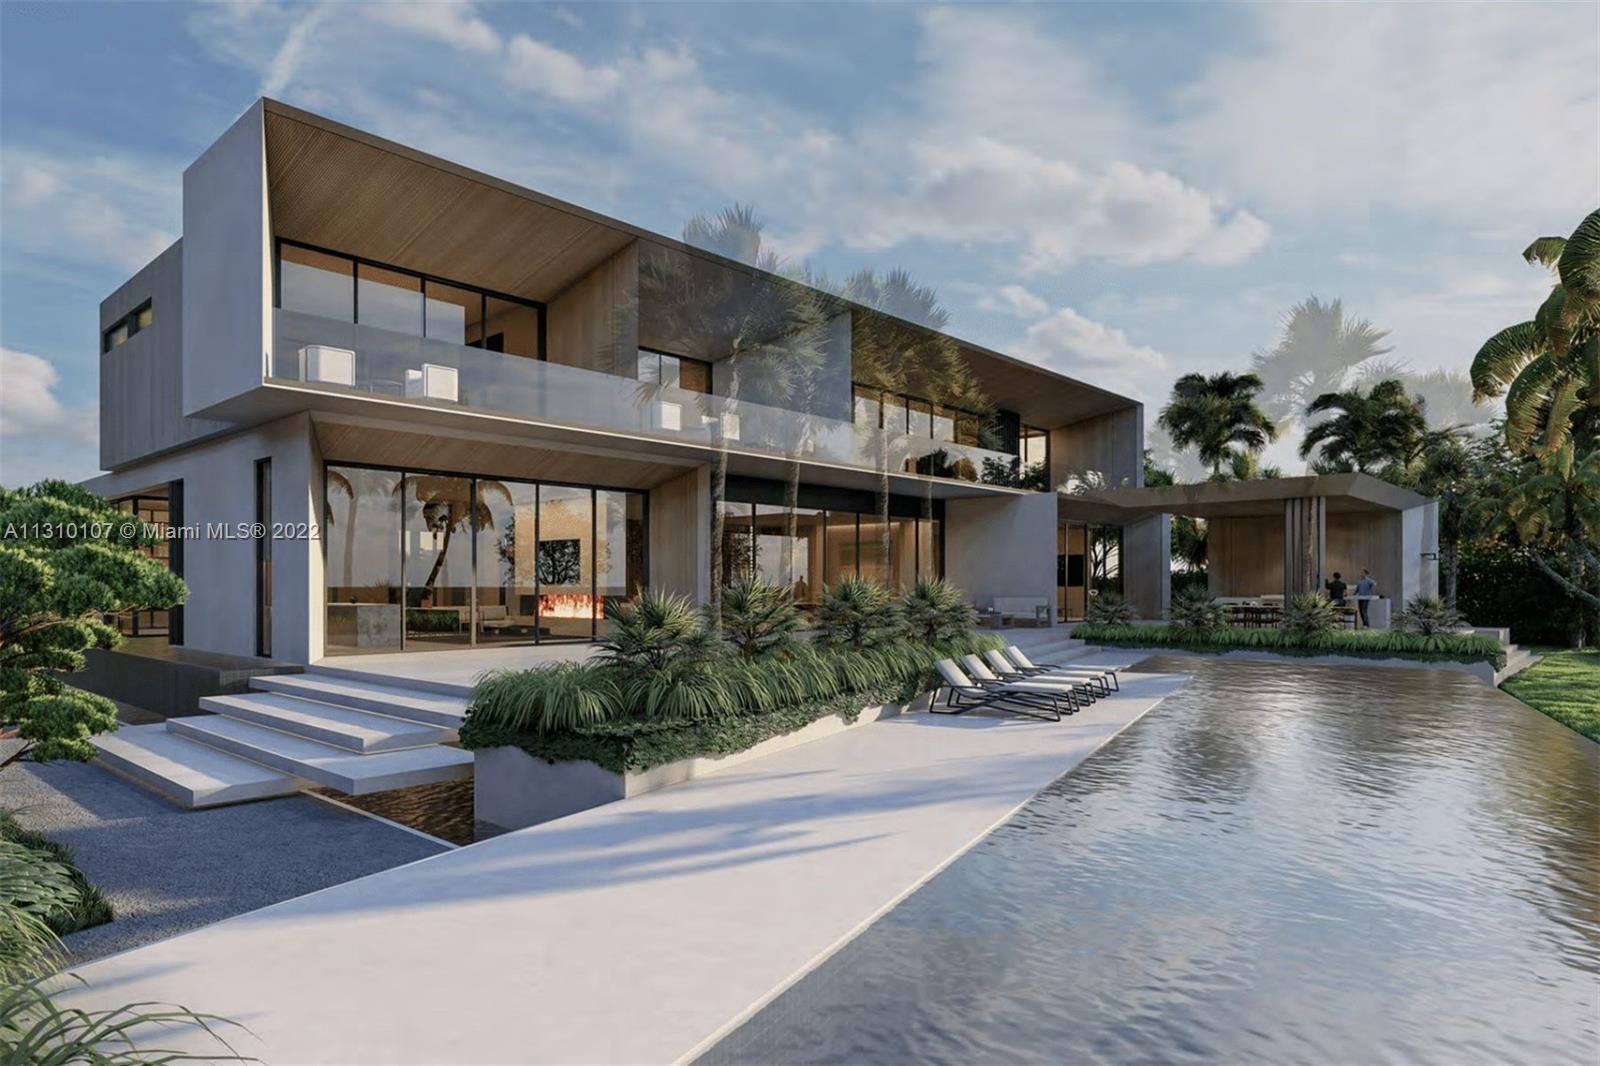 Extraordinary new villa by Aquablue Group on exclusive La Gorce Island. Astounding water features, i